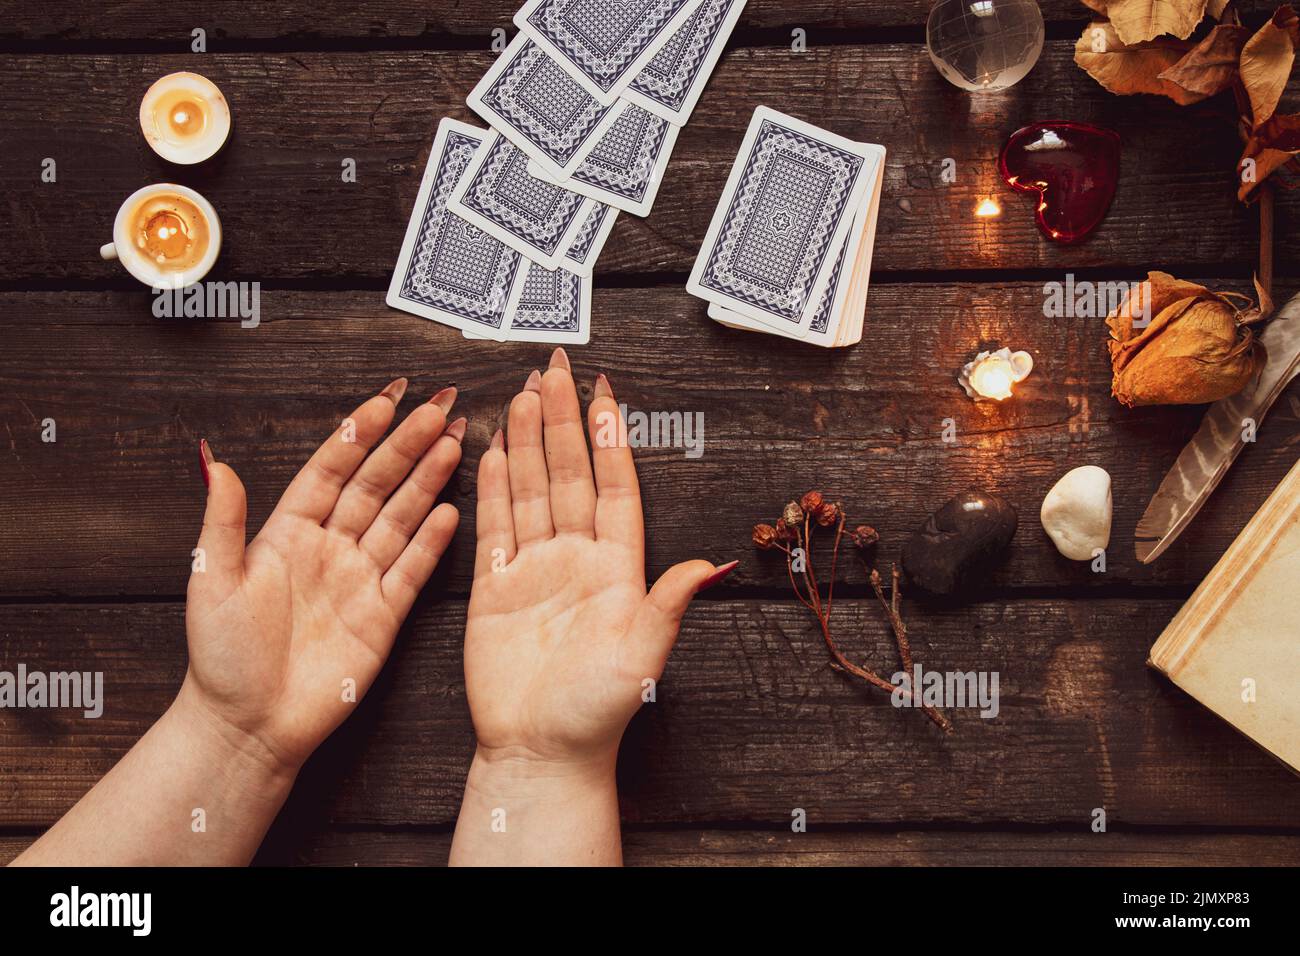 tarot fortune teller, magic and the occult, occult sciences, divination and predictions, witch Stock Photo